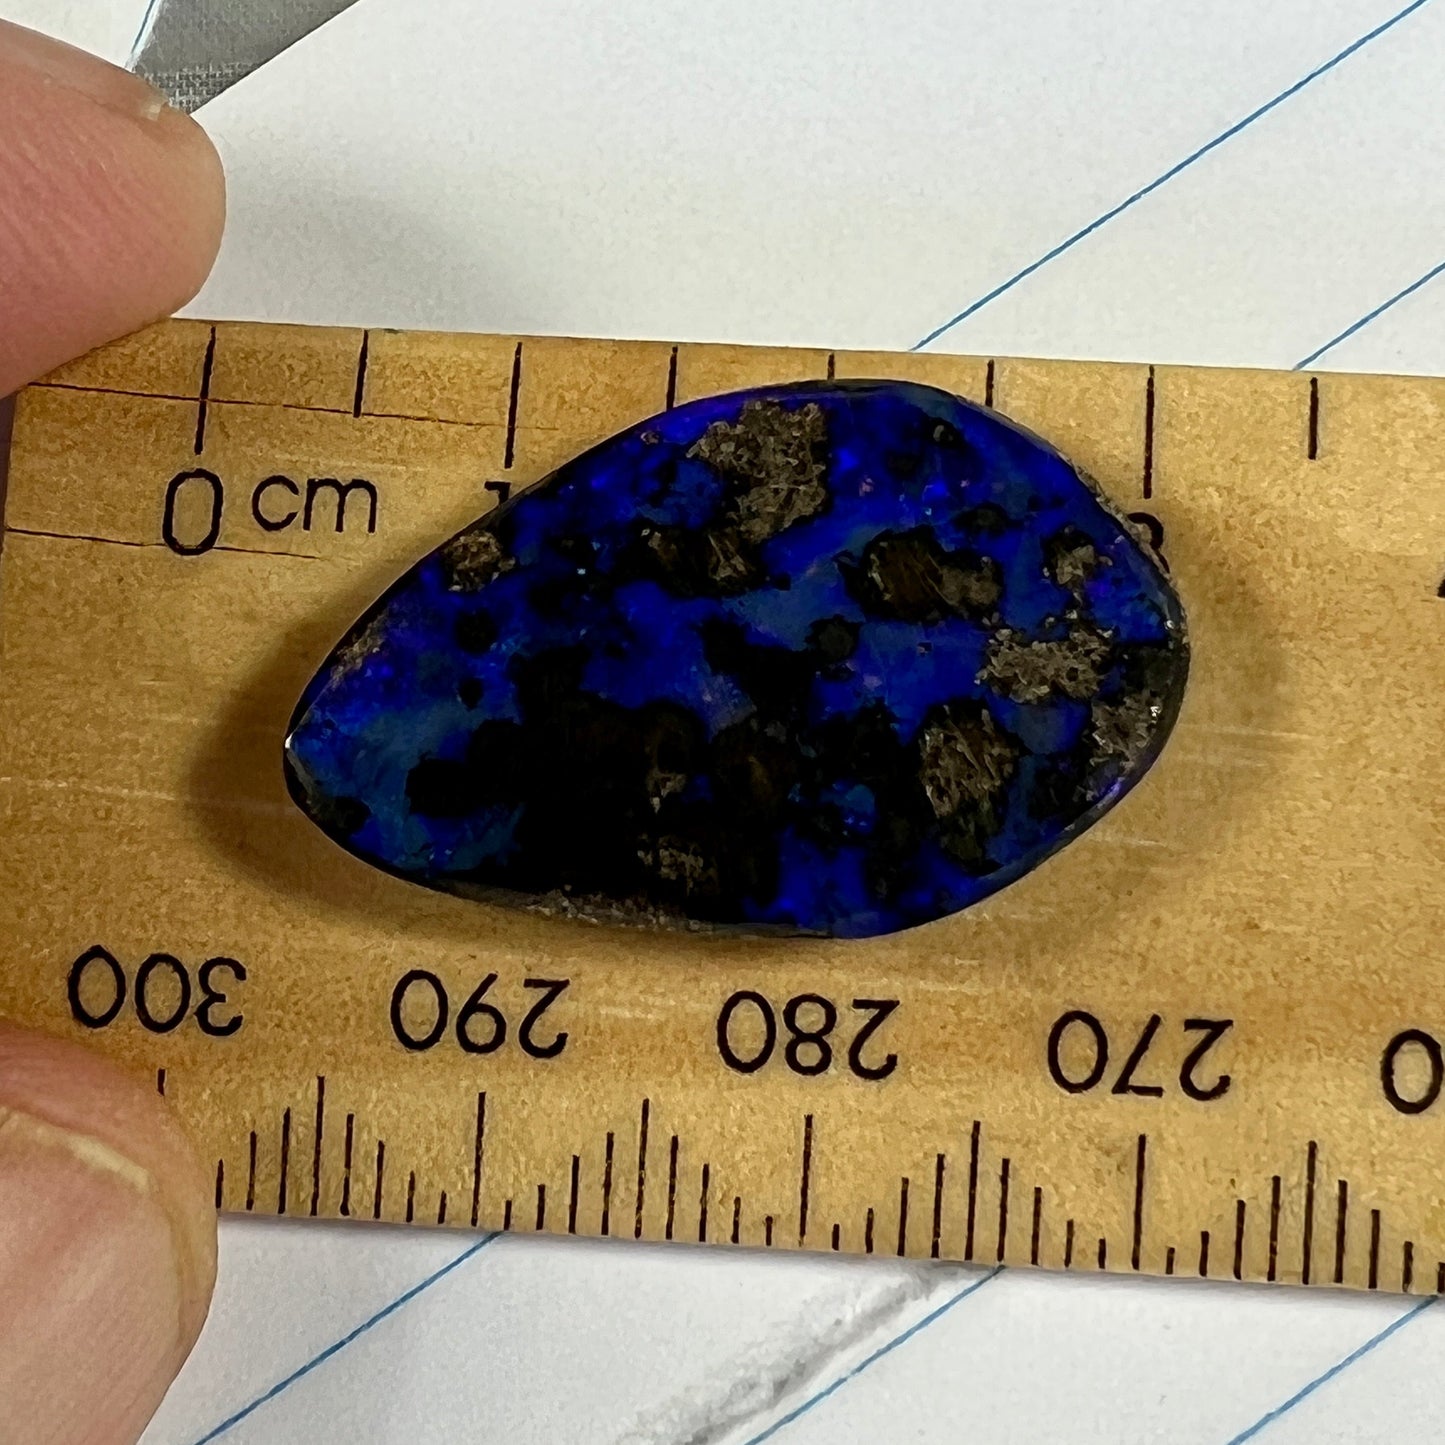 Stunning blues in this Winton boulder opal. Ready to set. Would make a great pendant.